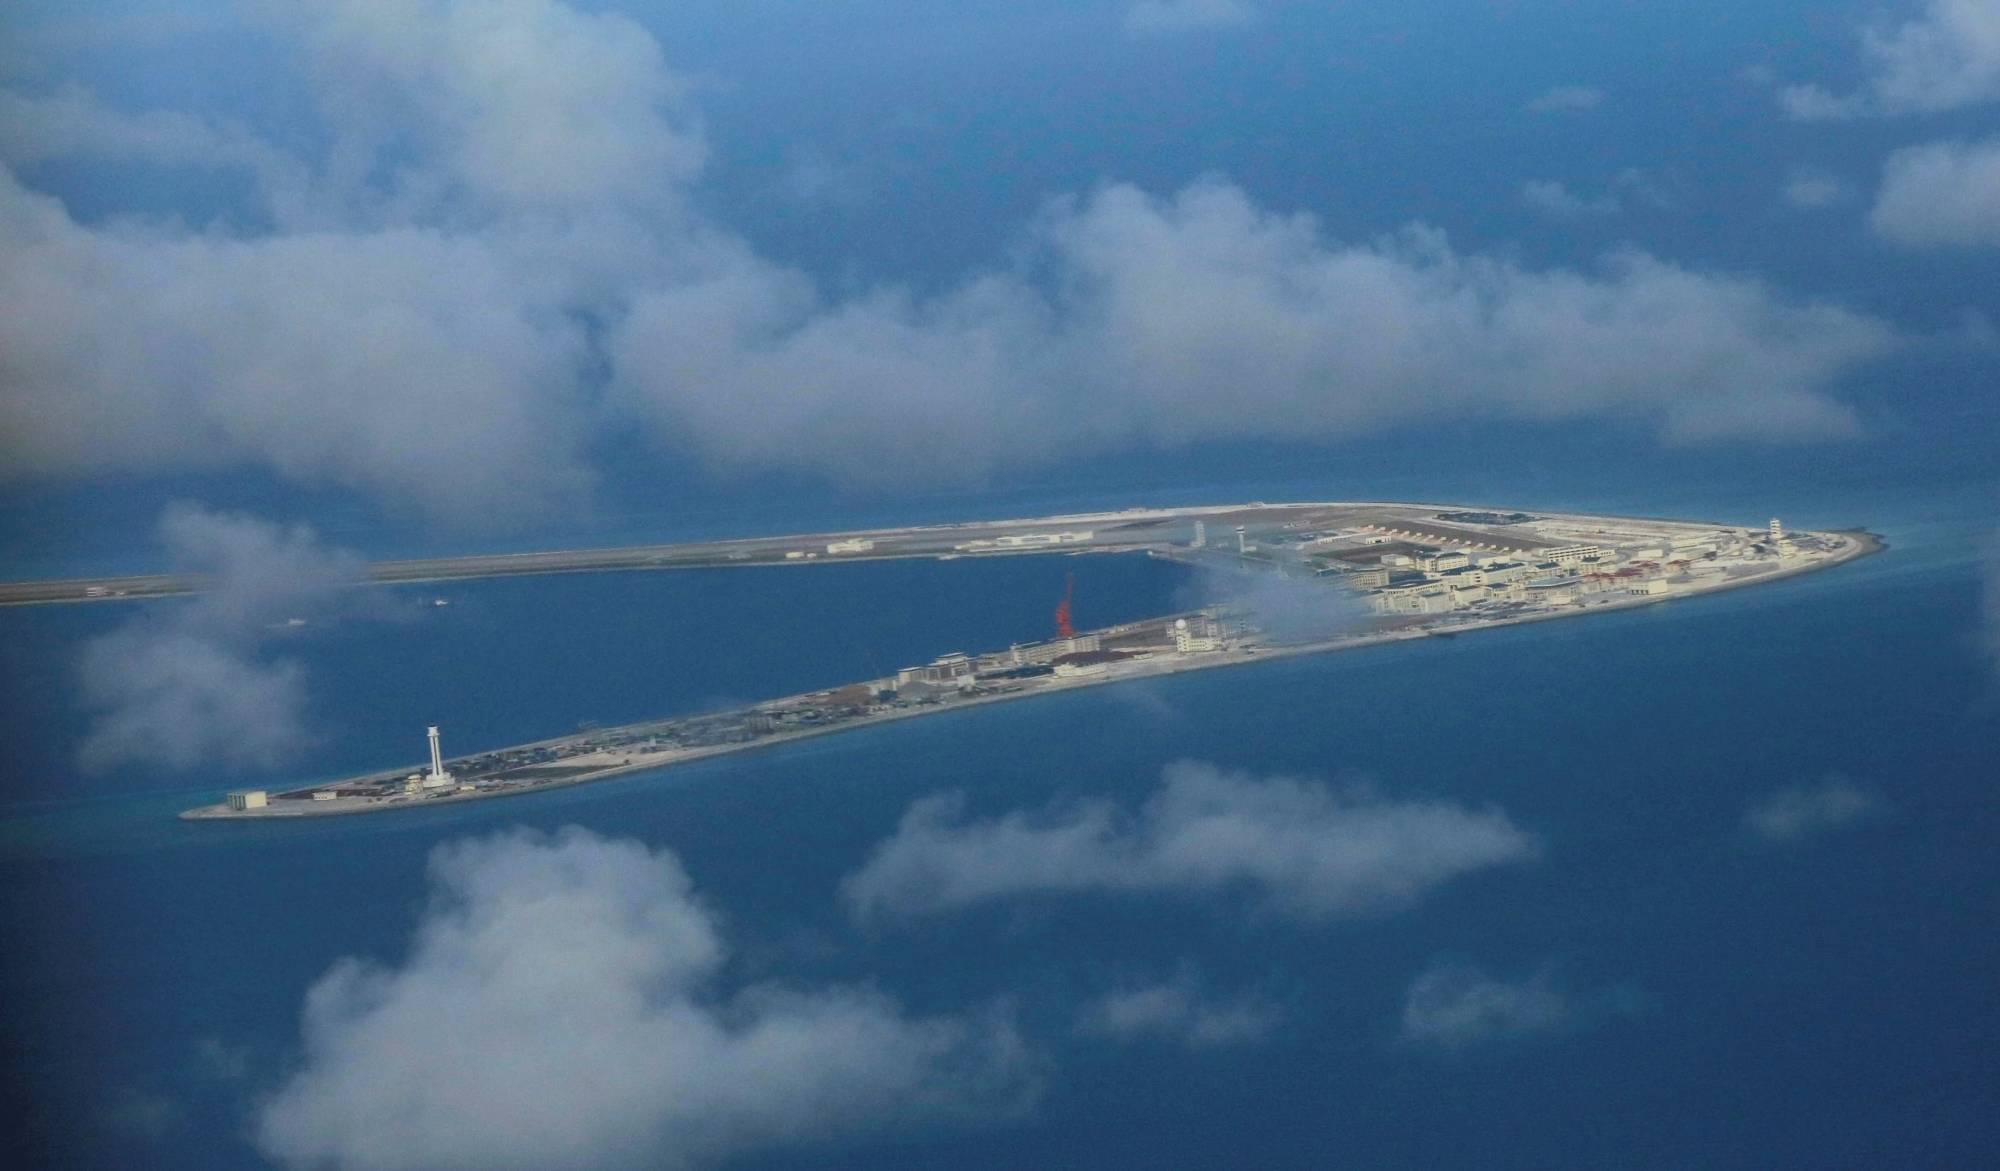 Chinese-held Subi Reef, a man-made island in the Spratly chain in the disputed South China Sea, is seen in April 2017.  | POOL / VIA REUTERS